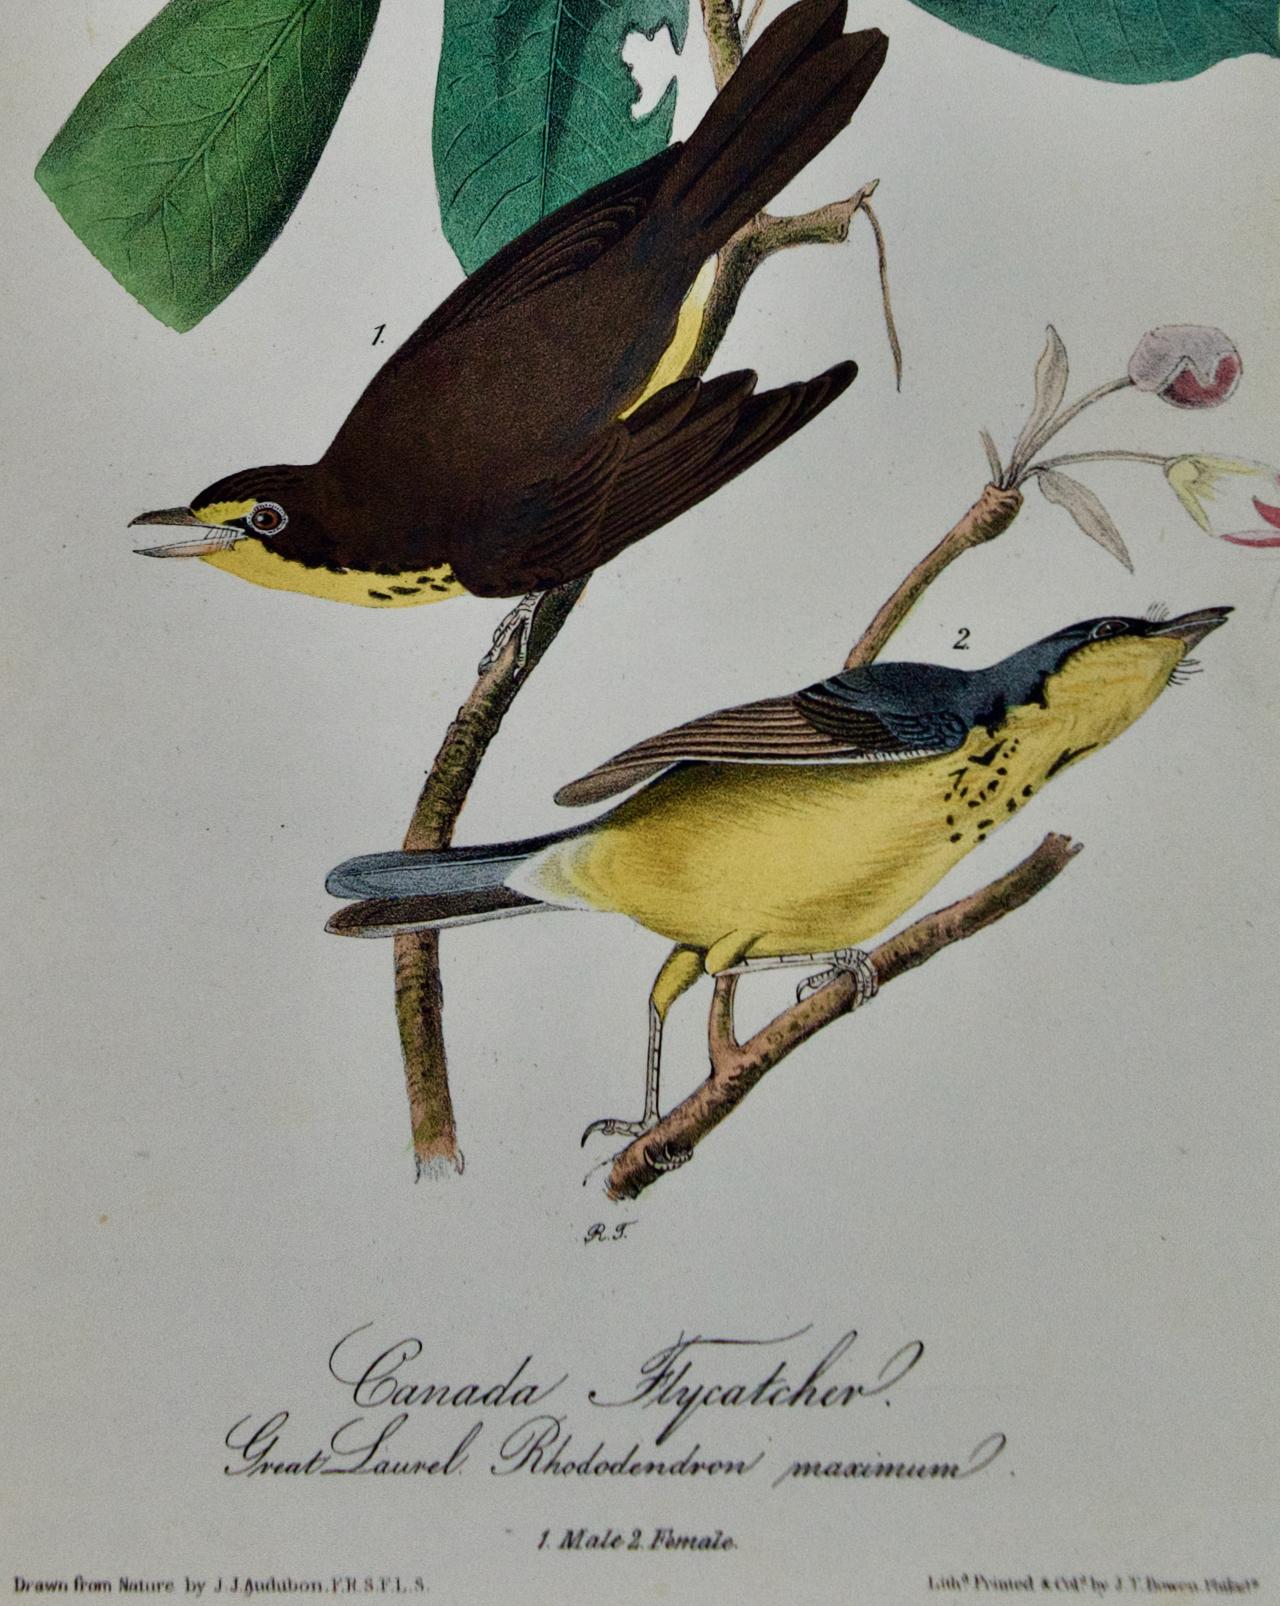 This is an original John James Audubon hand-colored royal first octavo edition lithograph entitled 